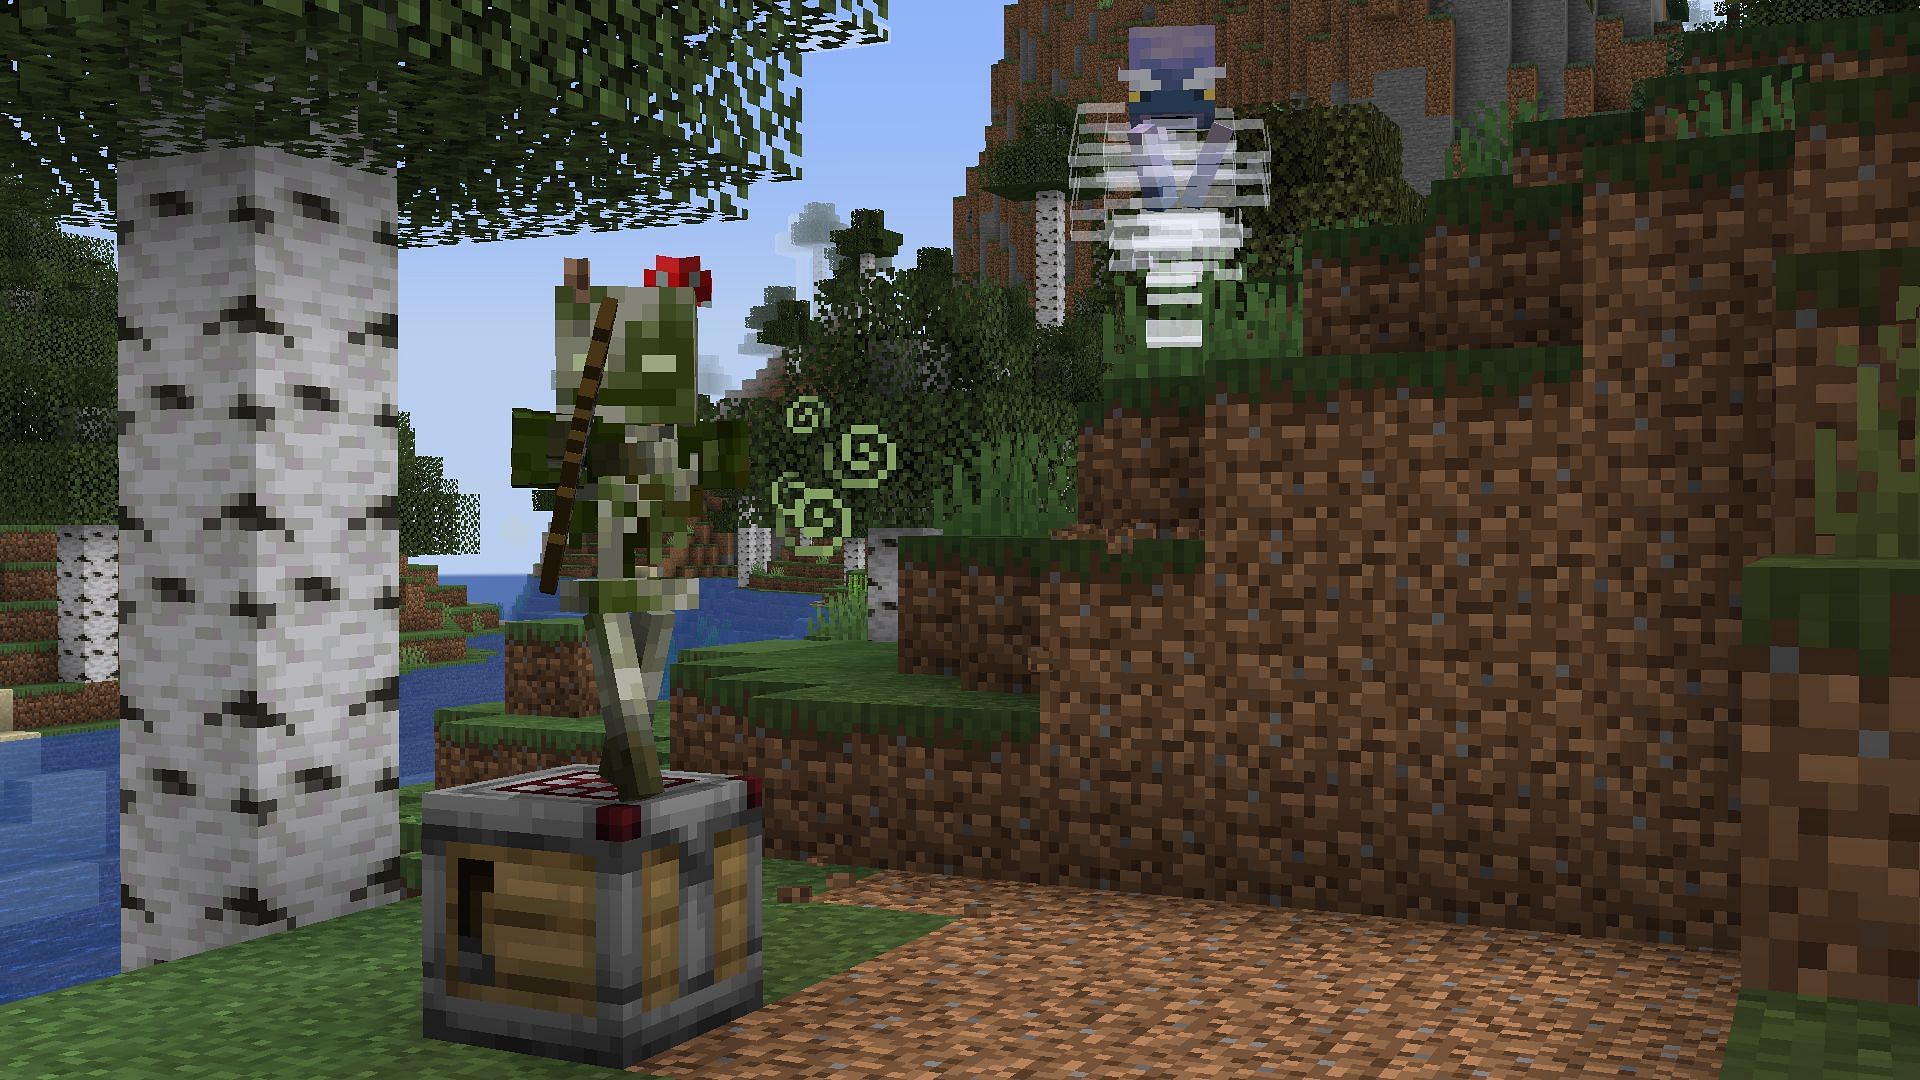 The crafter, breeze, and bogged are three of the biggest experimental features in Armored Paws (Image via Mojang)